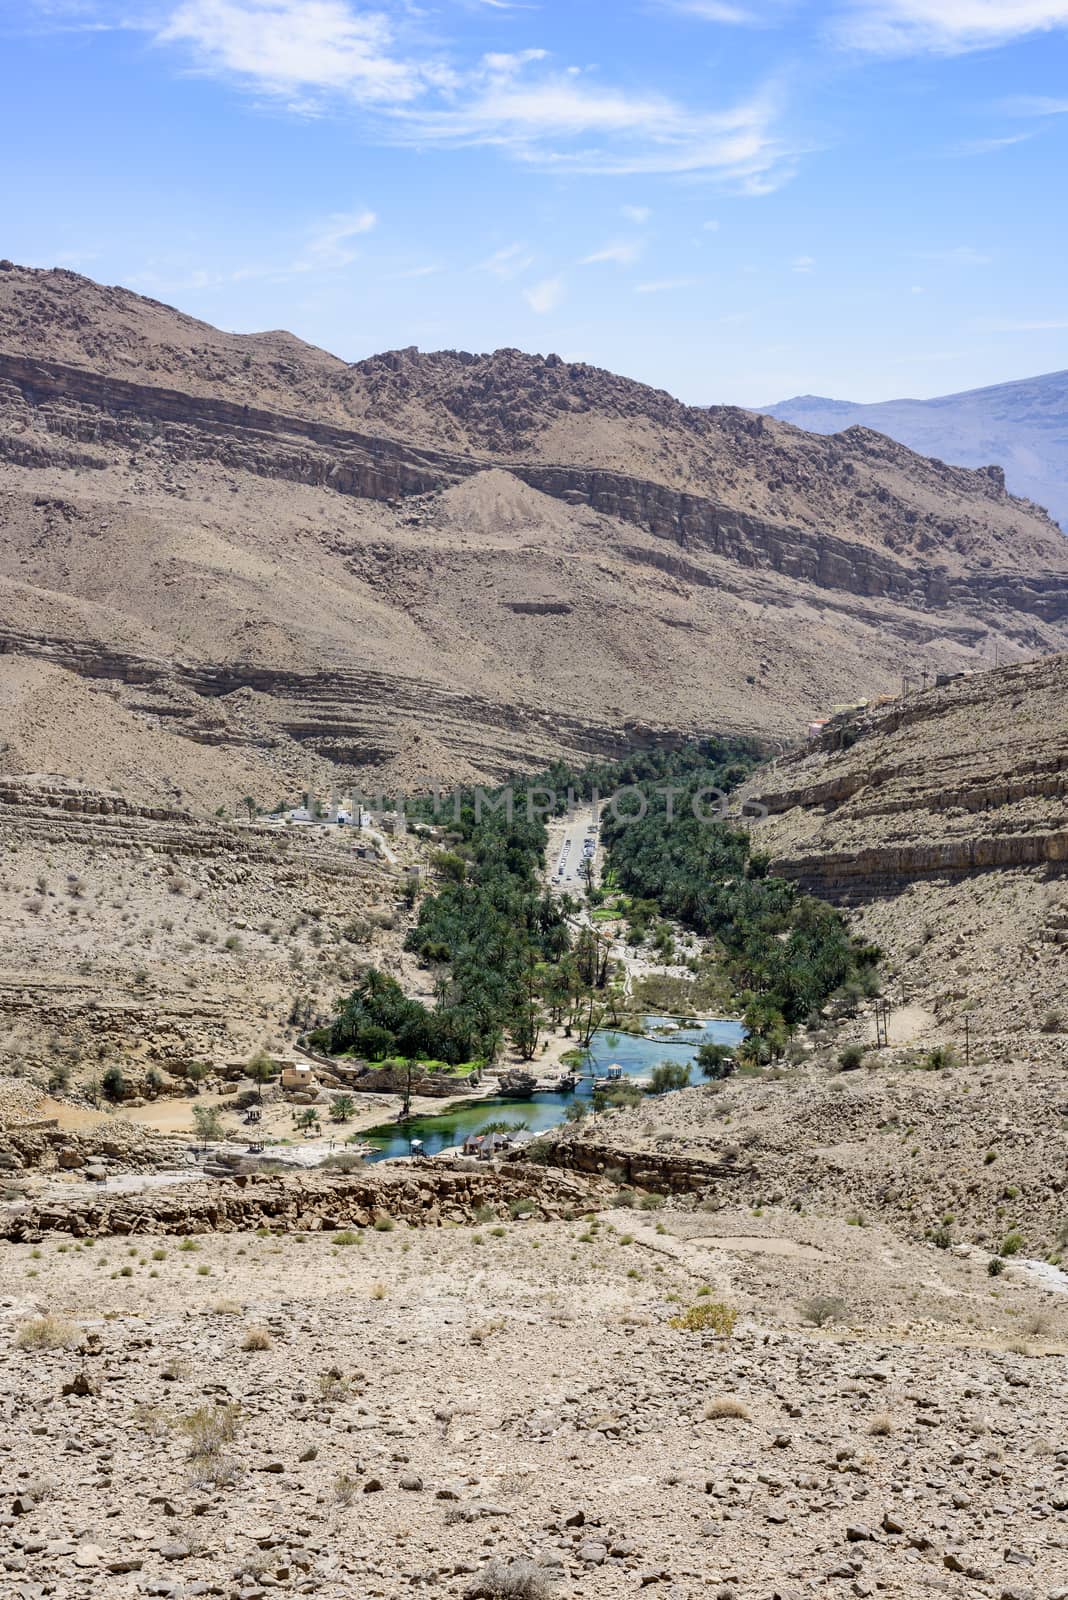 view of Wadi Bani Khalid with the main pool, Sultanate of Oman by GABIS